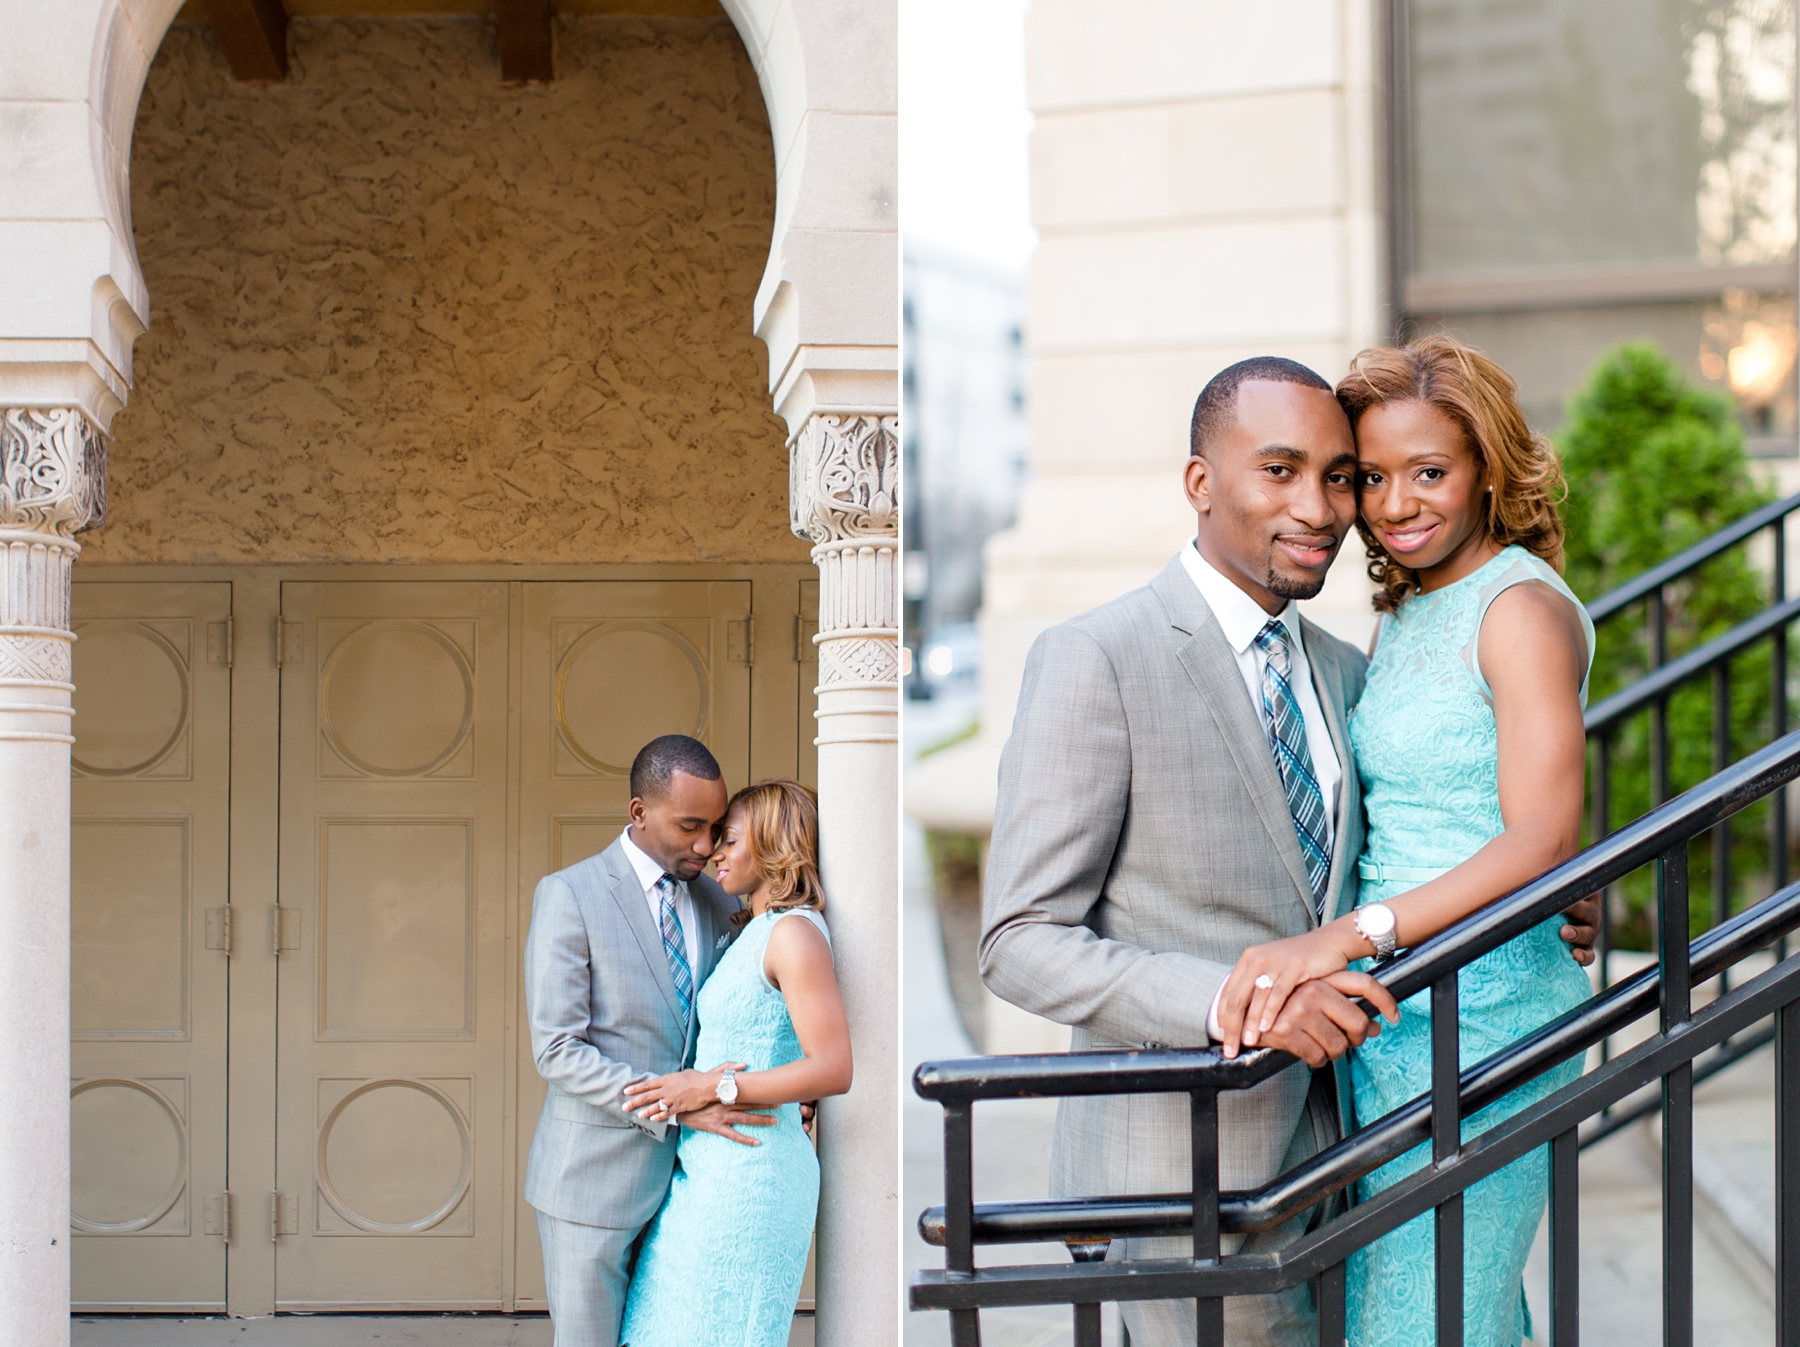 Young professionals engagement session by Elle Danielle Photography